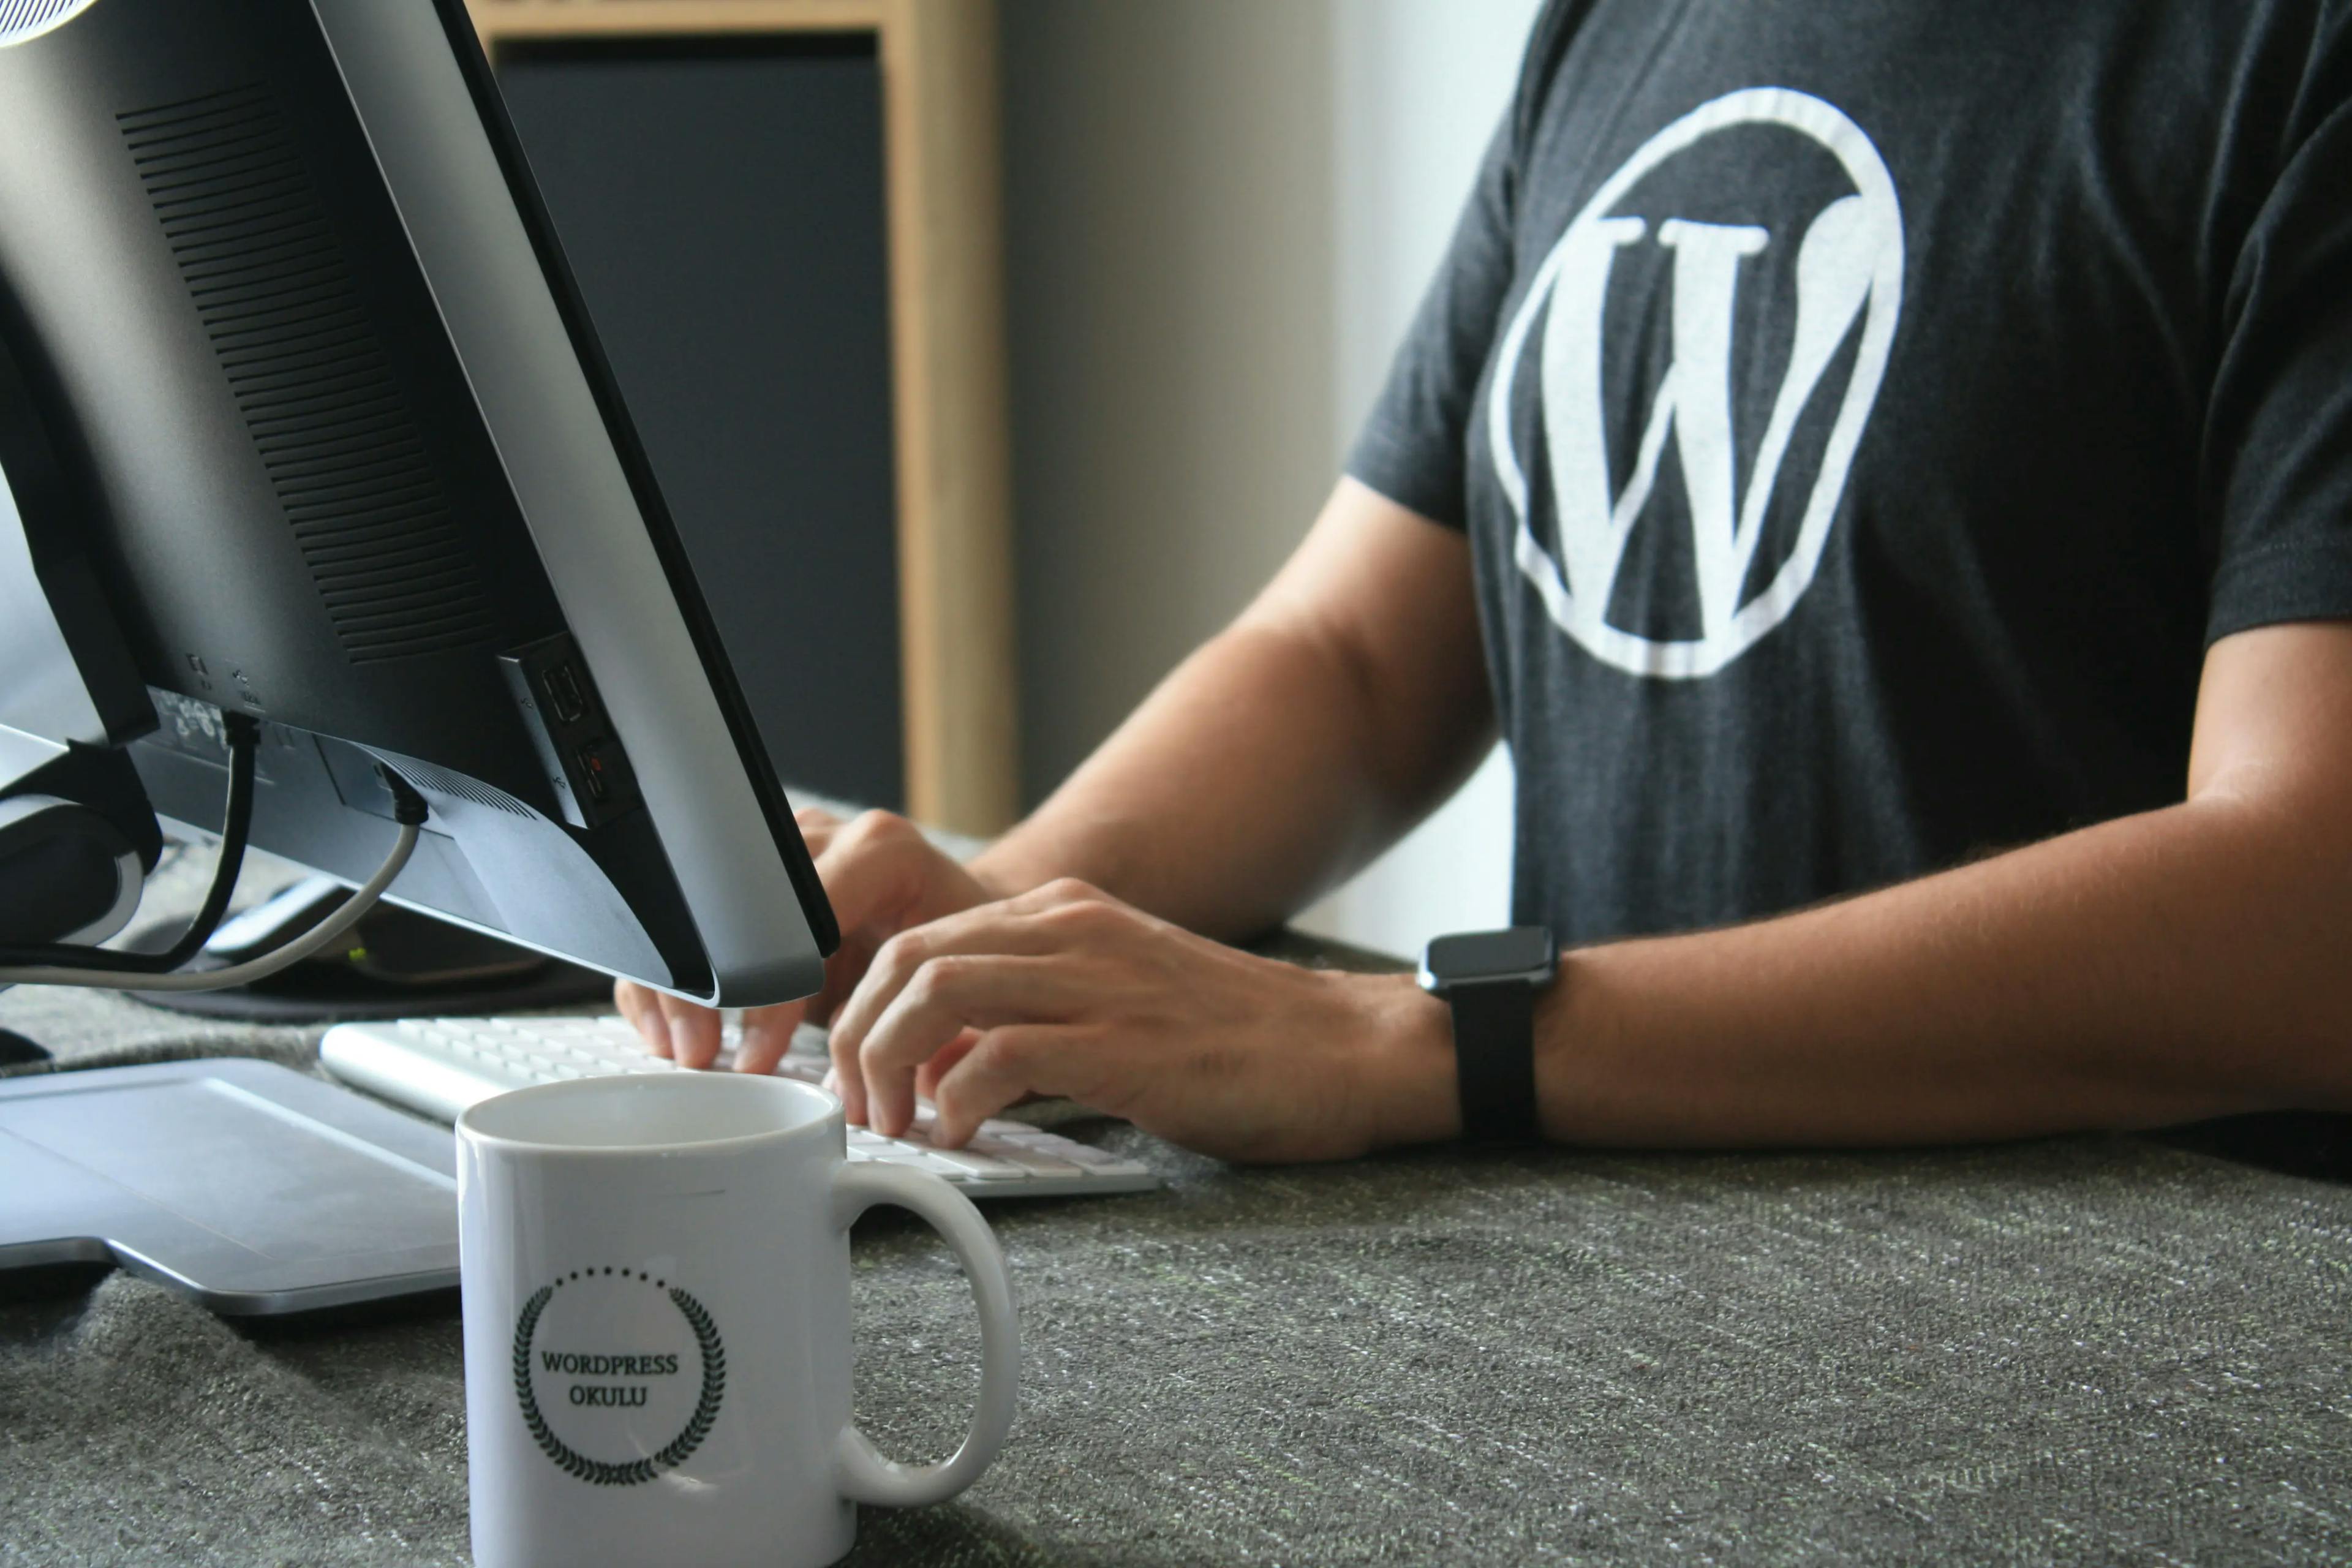 Roadmap to WordPress: Beginners Guide for Small Businesses